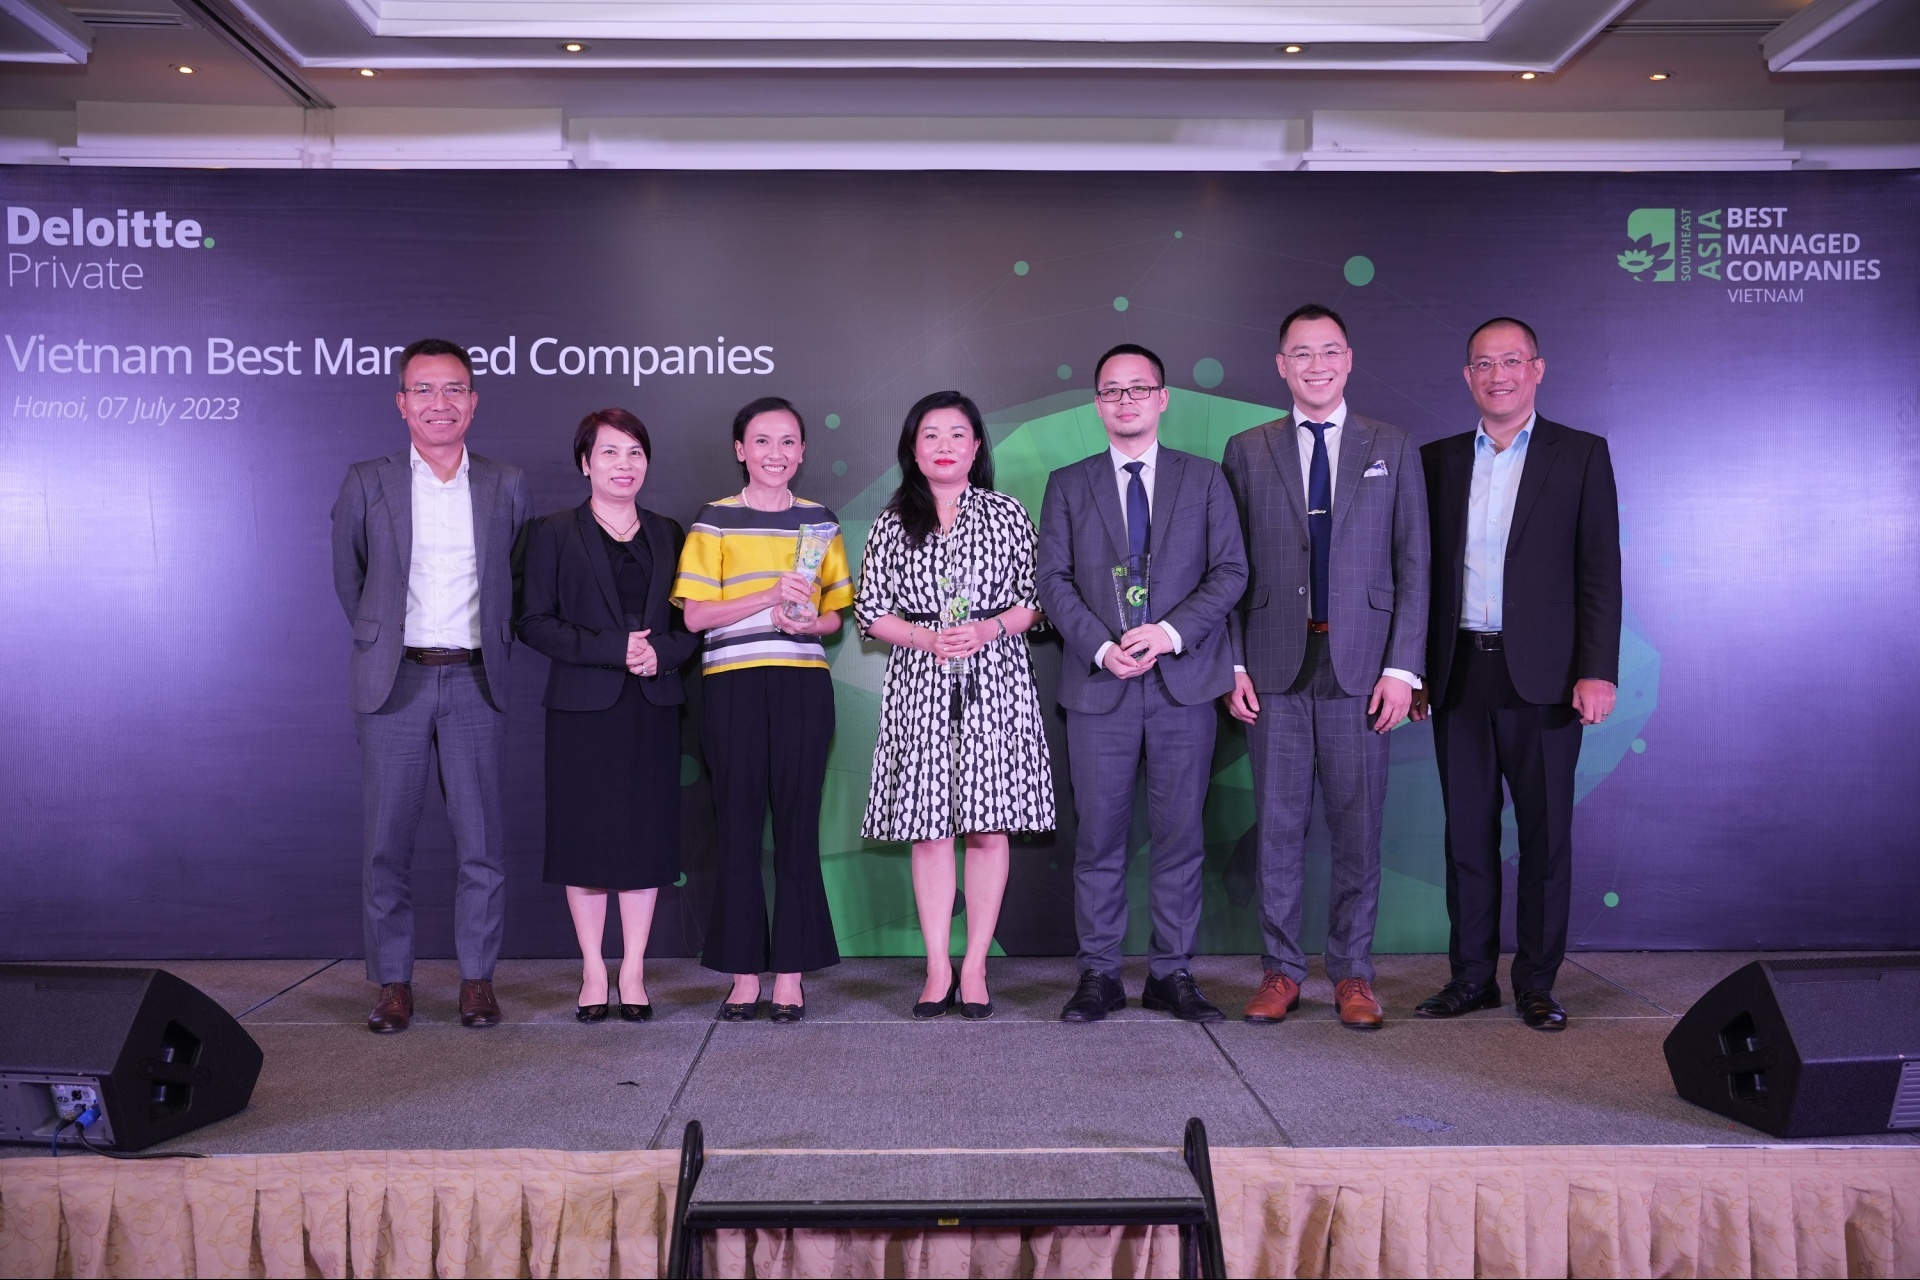 Vietnam’s Best Managed Companies for 2023 unveiled